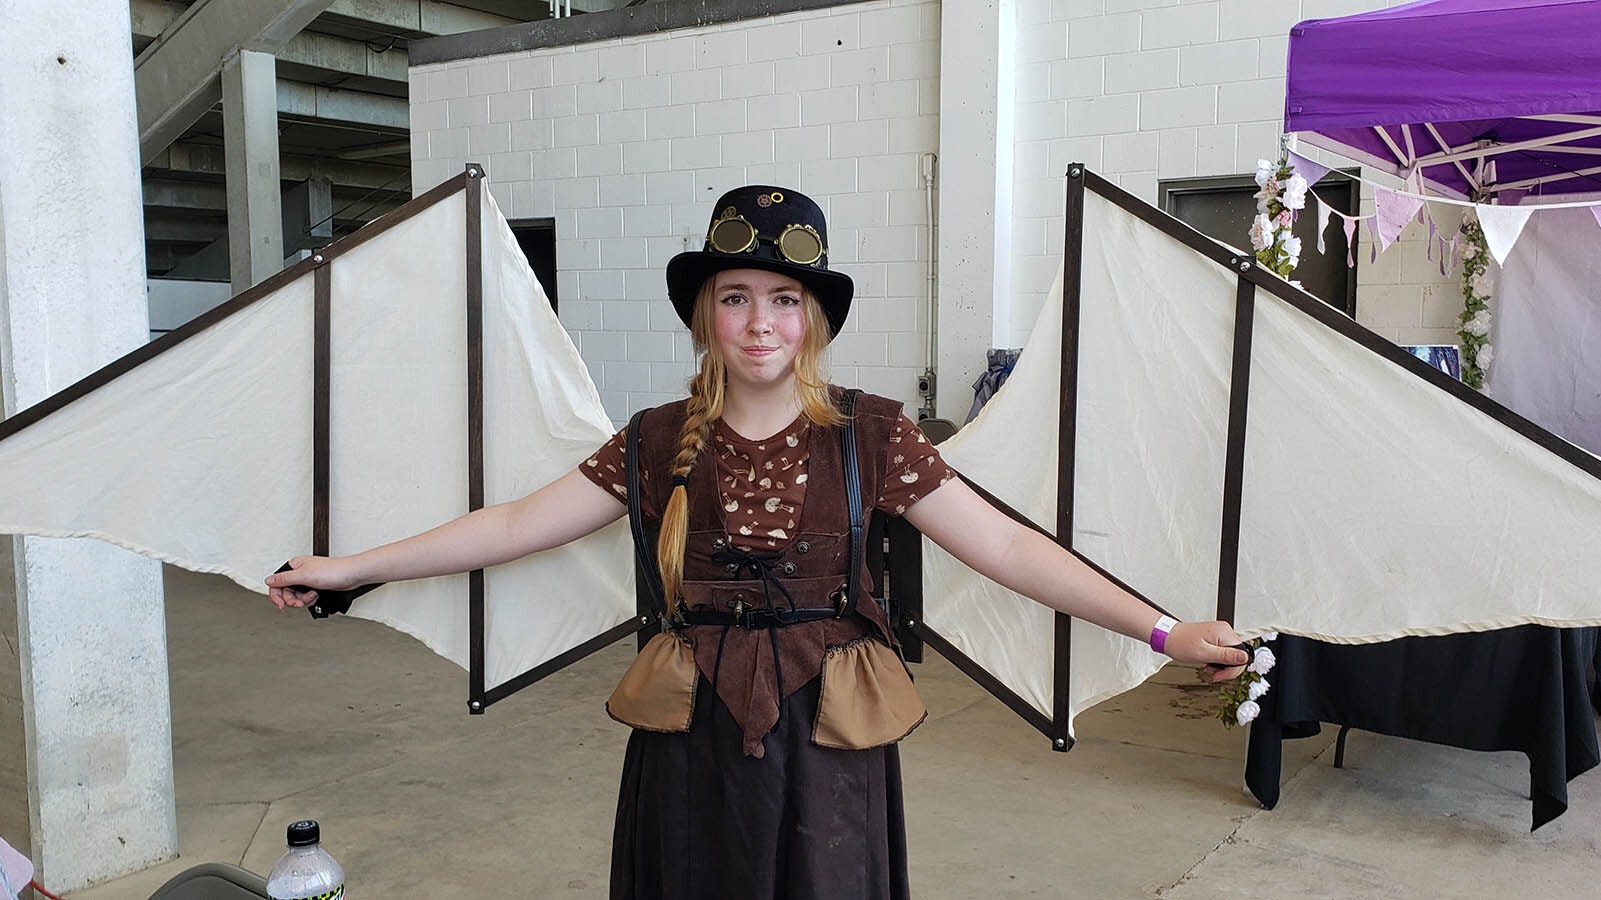 Rebecca Allred won the costume contest for youths with this steampunk rendition she made with the help of her grandparents in Lovell.